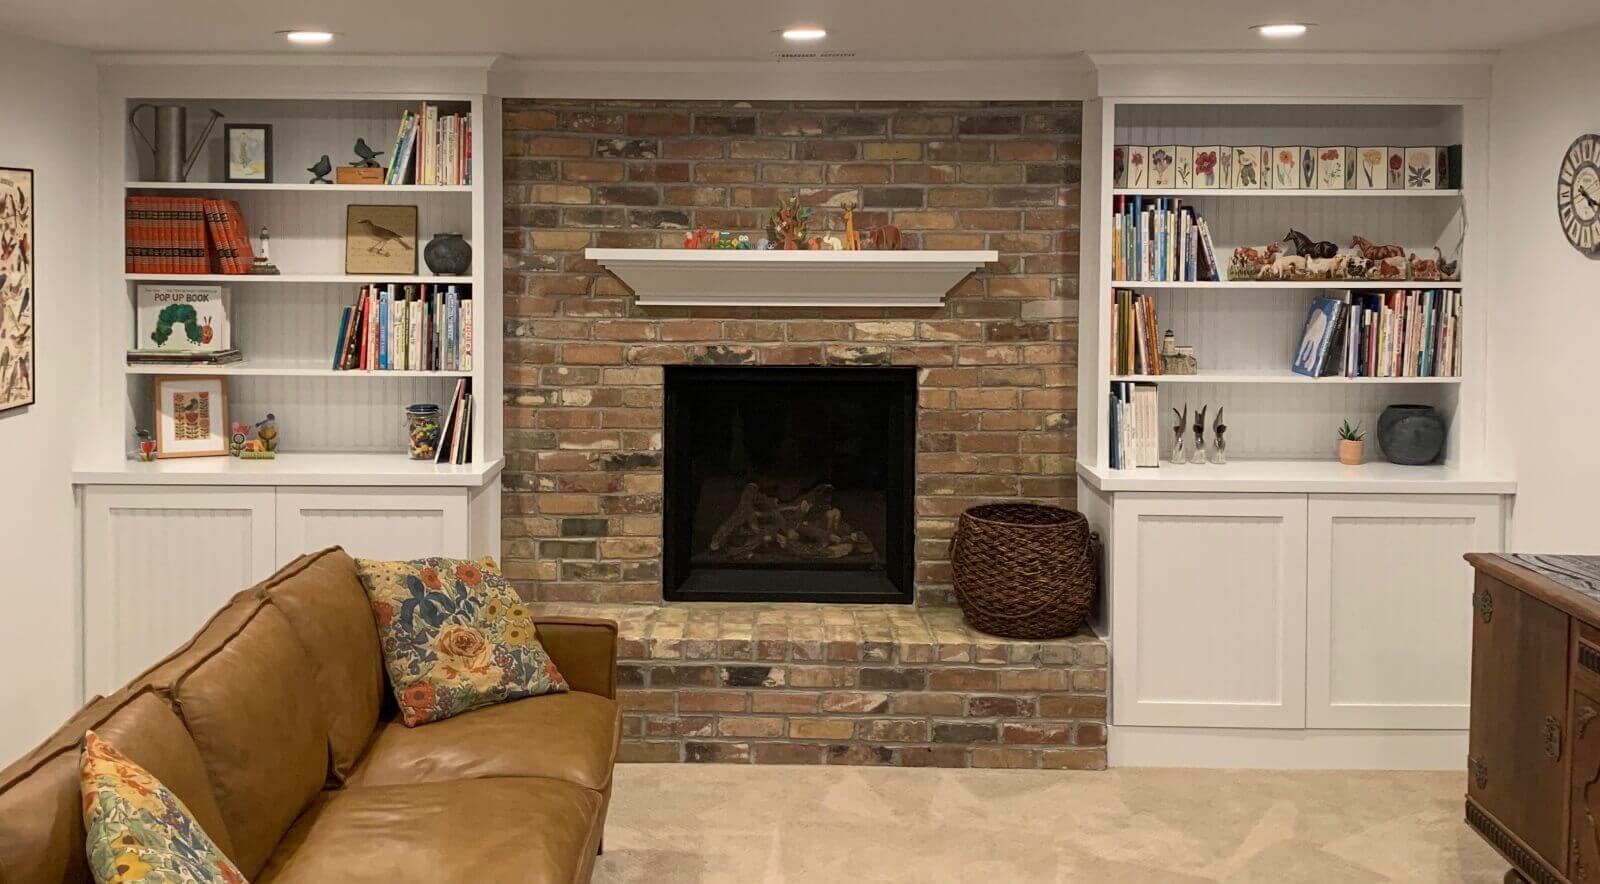 Living room with brick fireplace and bookshelves, cabinet in soothing blue color, invoking calmness and tranquility